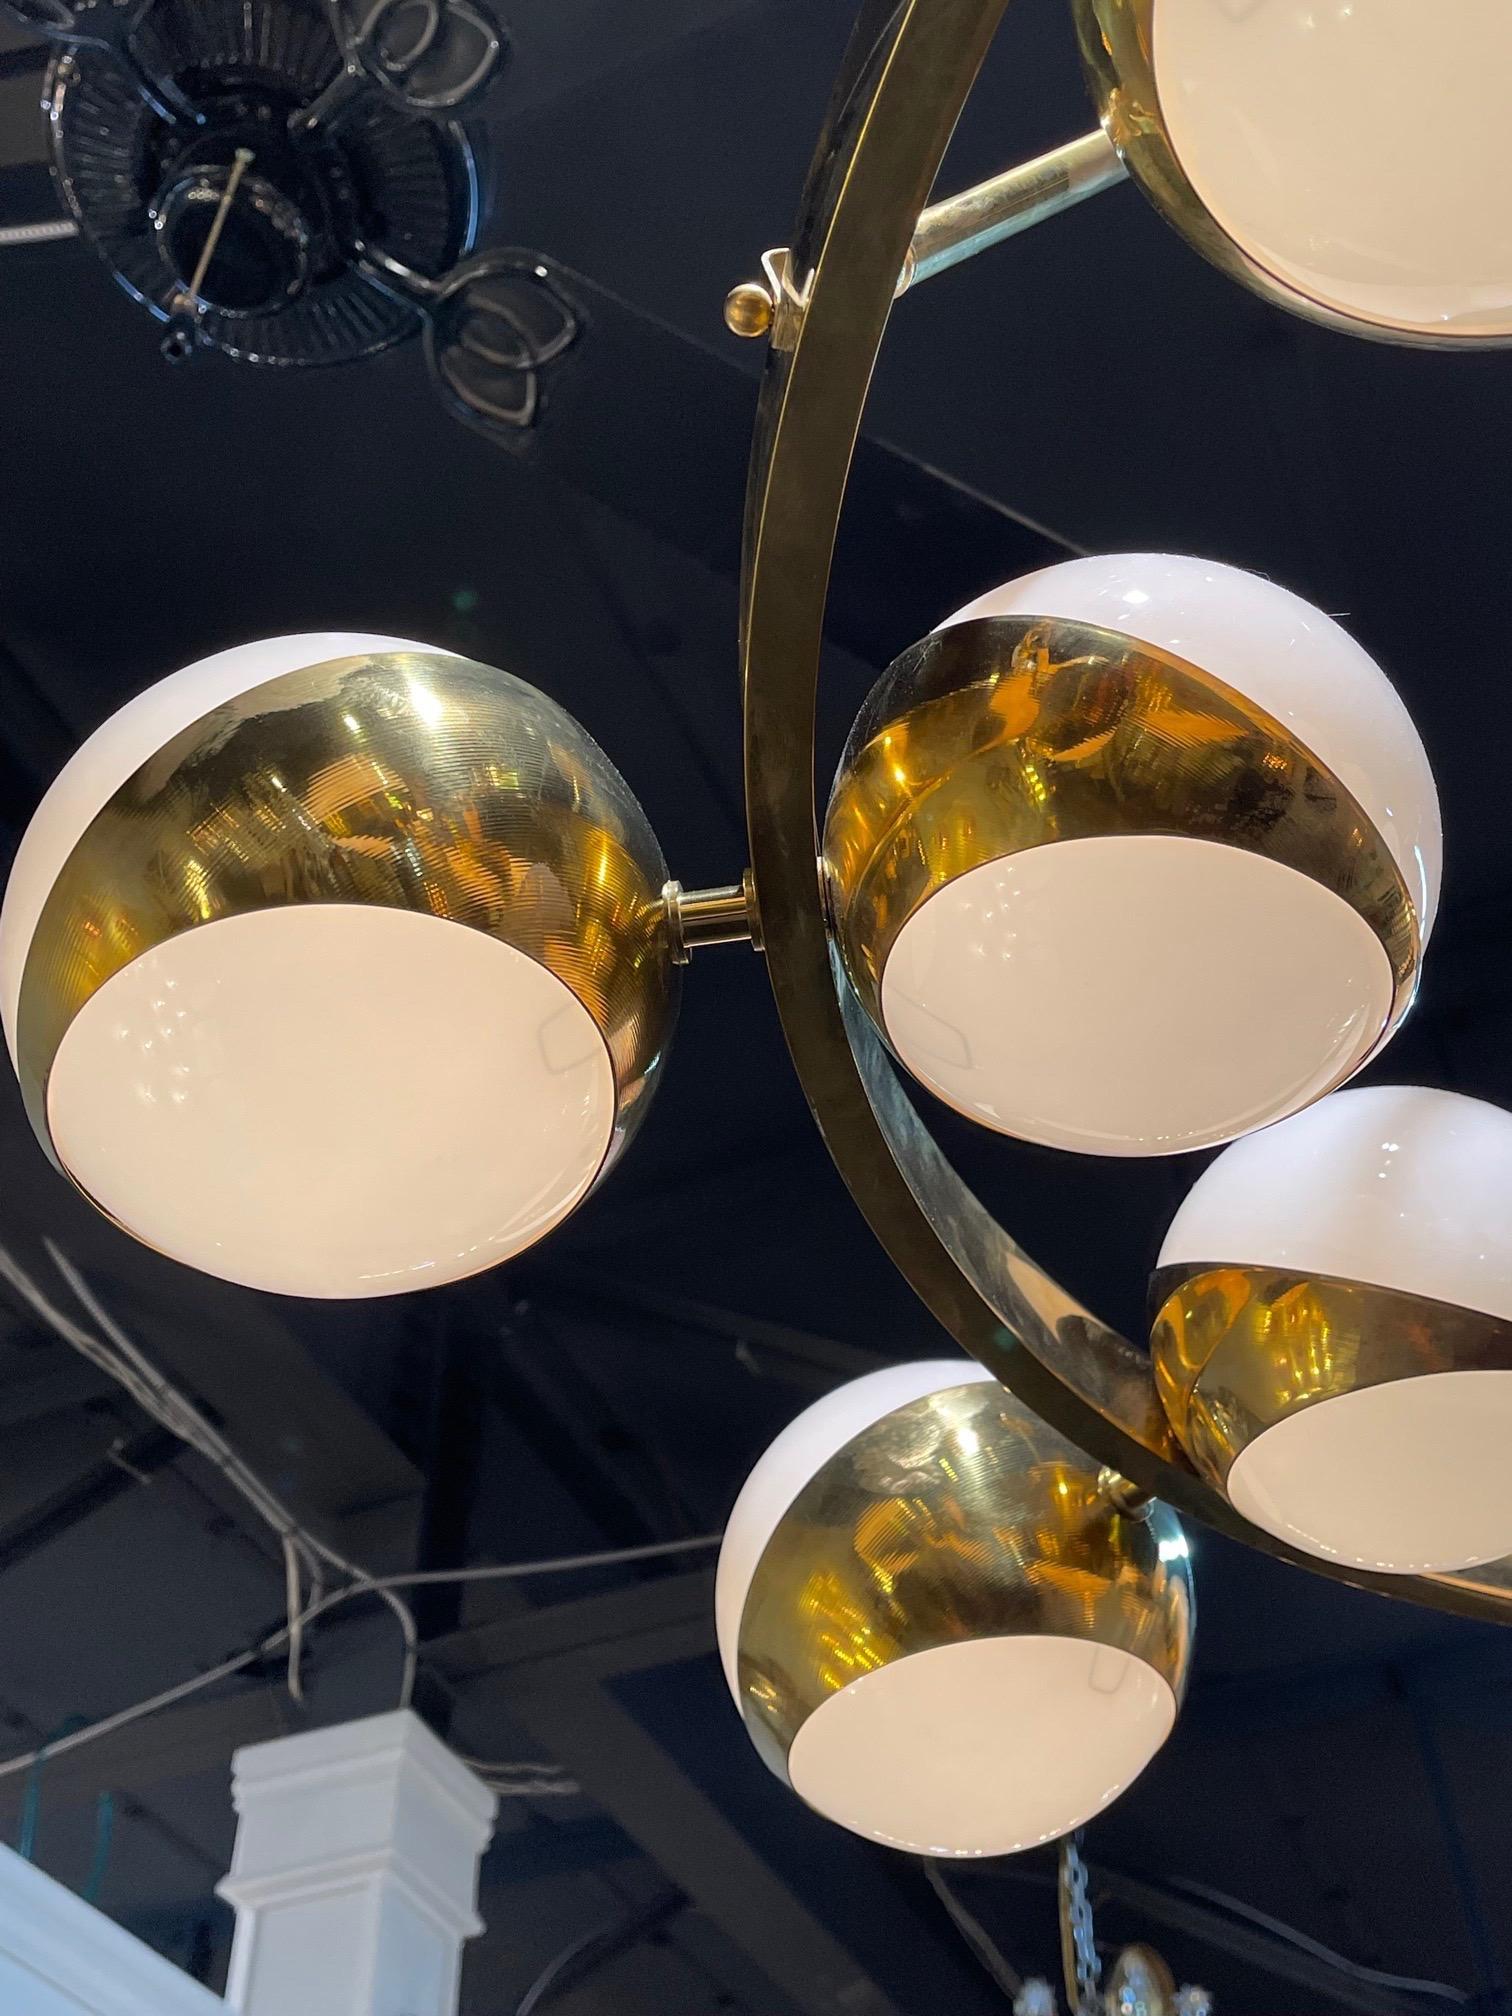 Spectacular modern murano glass and brass suspension 18 light chandelier. Creates a beautiful upscale decorative look. A true work of art!!